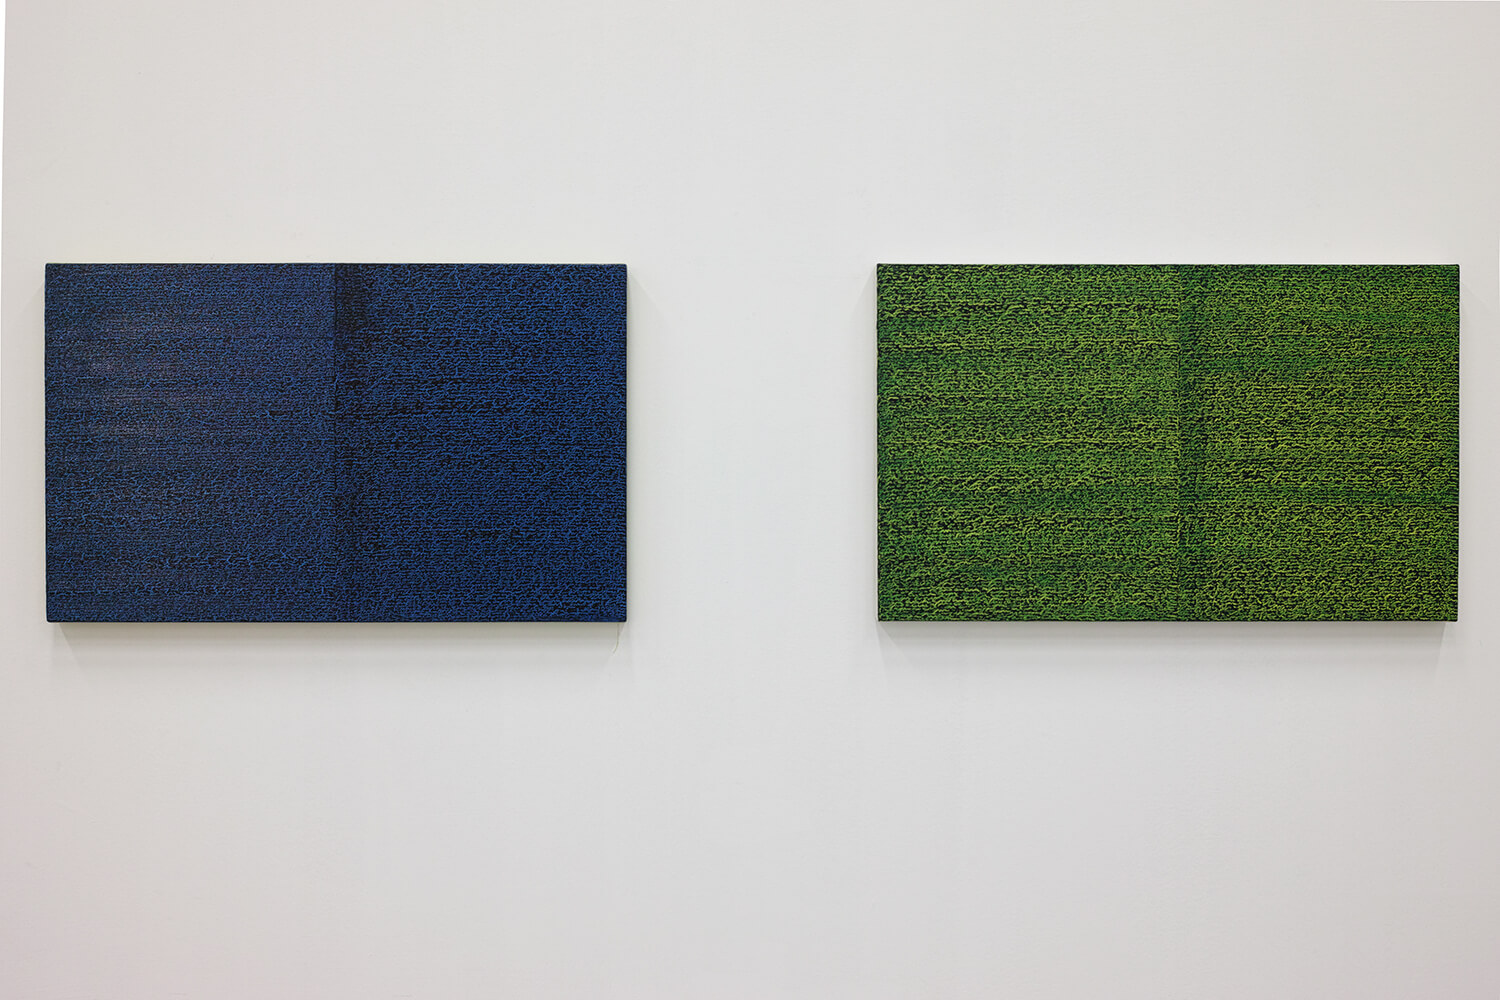 'Open Book blue-blue dark'  (left) & 'Open Book  yellow-green' (right)<br>Oil and Amber on canvas over panel, 37 x 60 cm, 2008 each